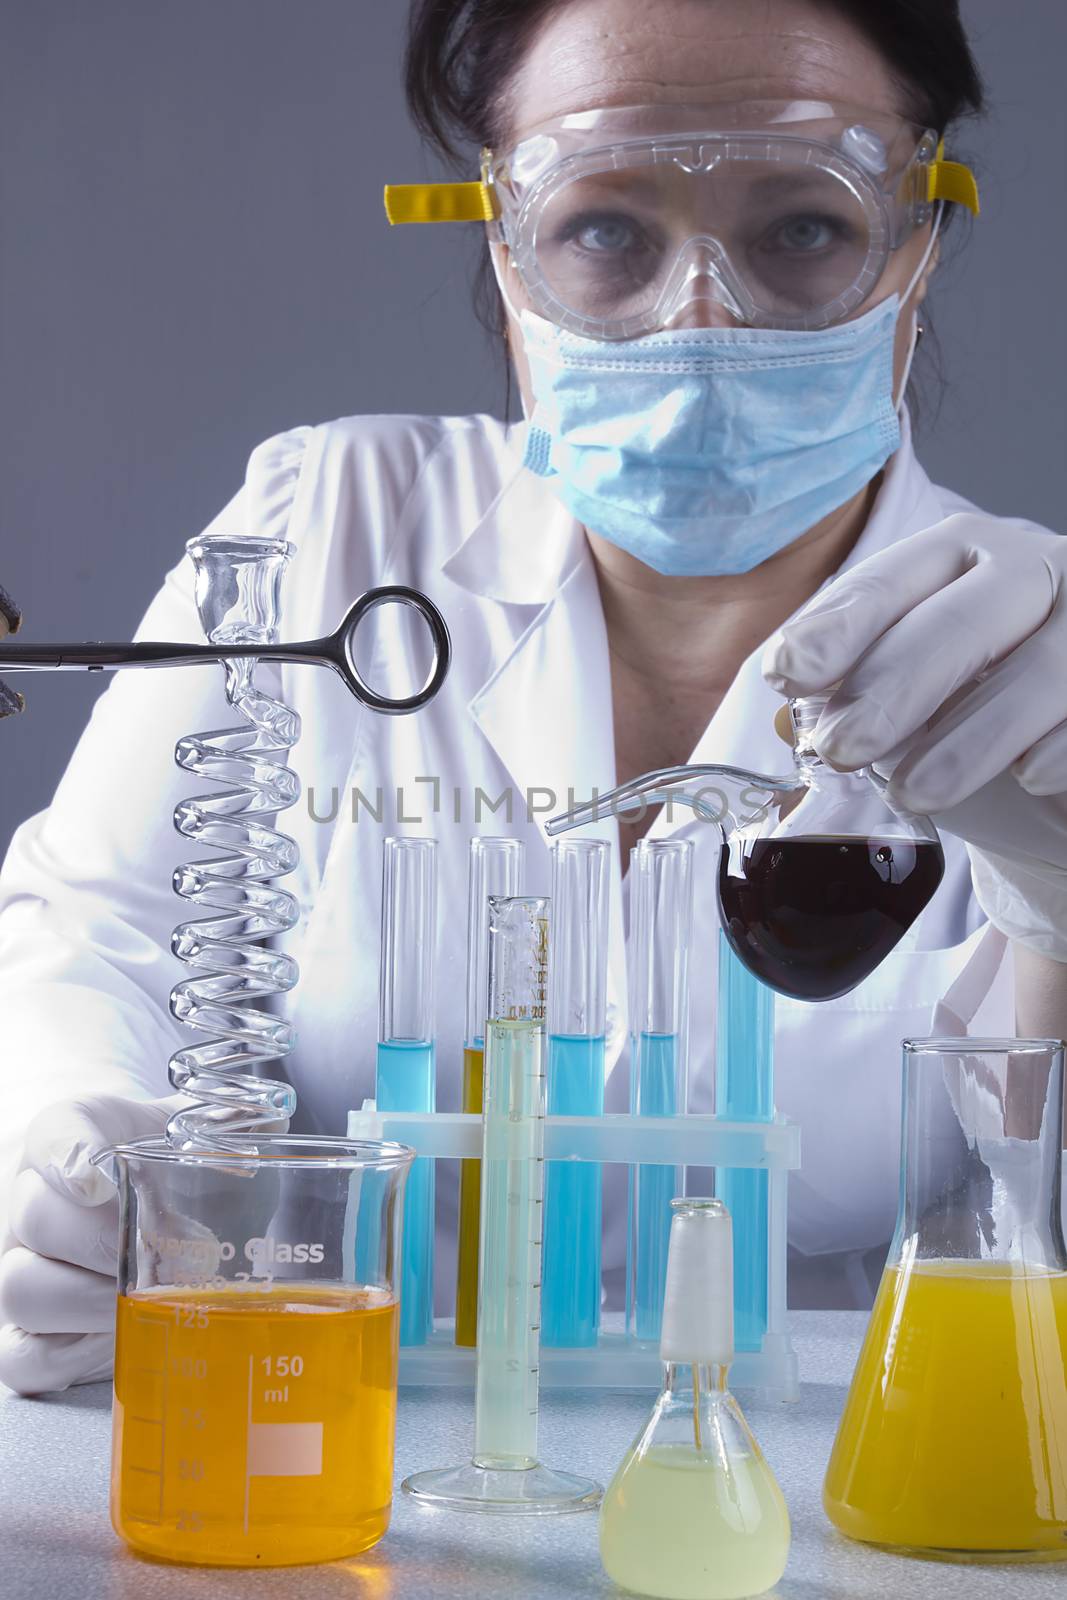 Laboratory assistant at work by VIPDesignUSA